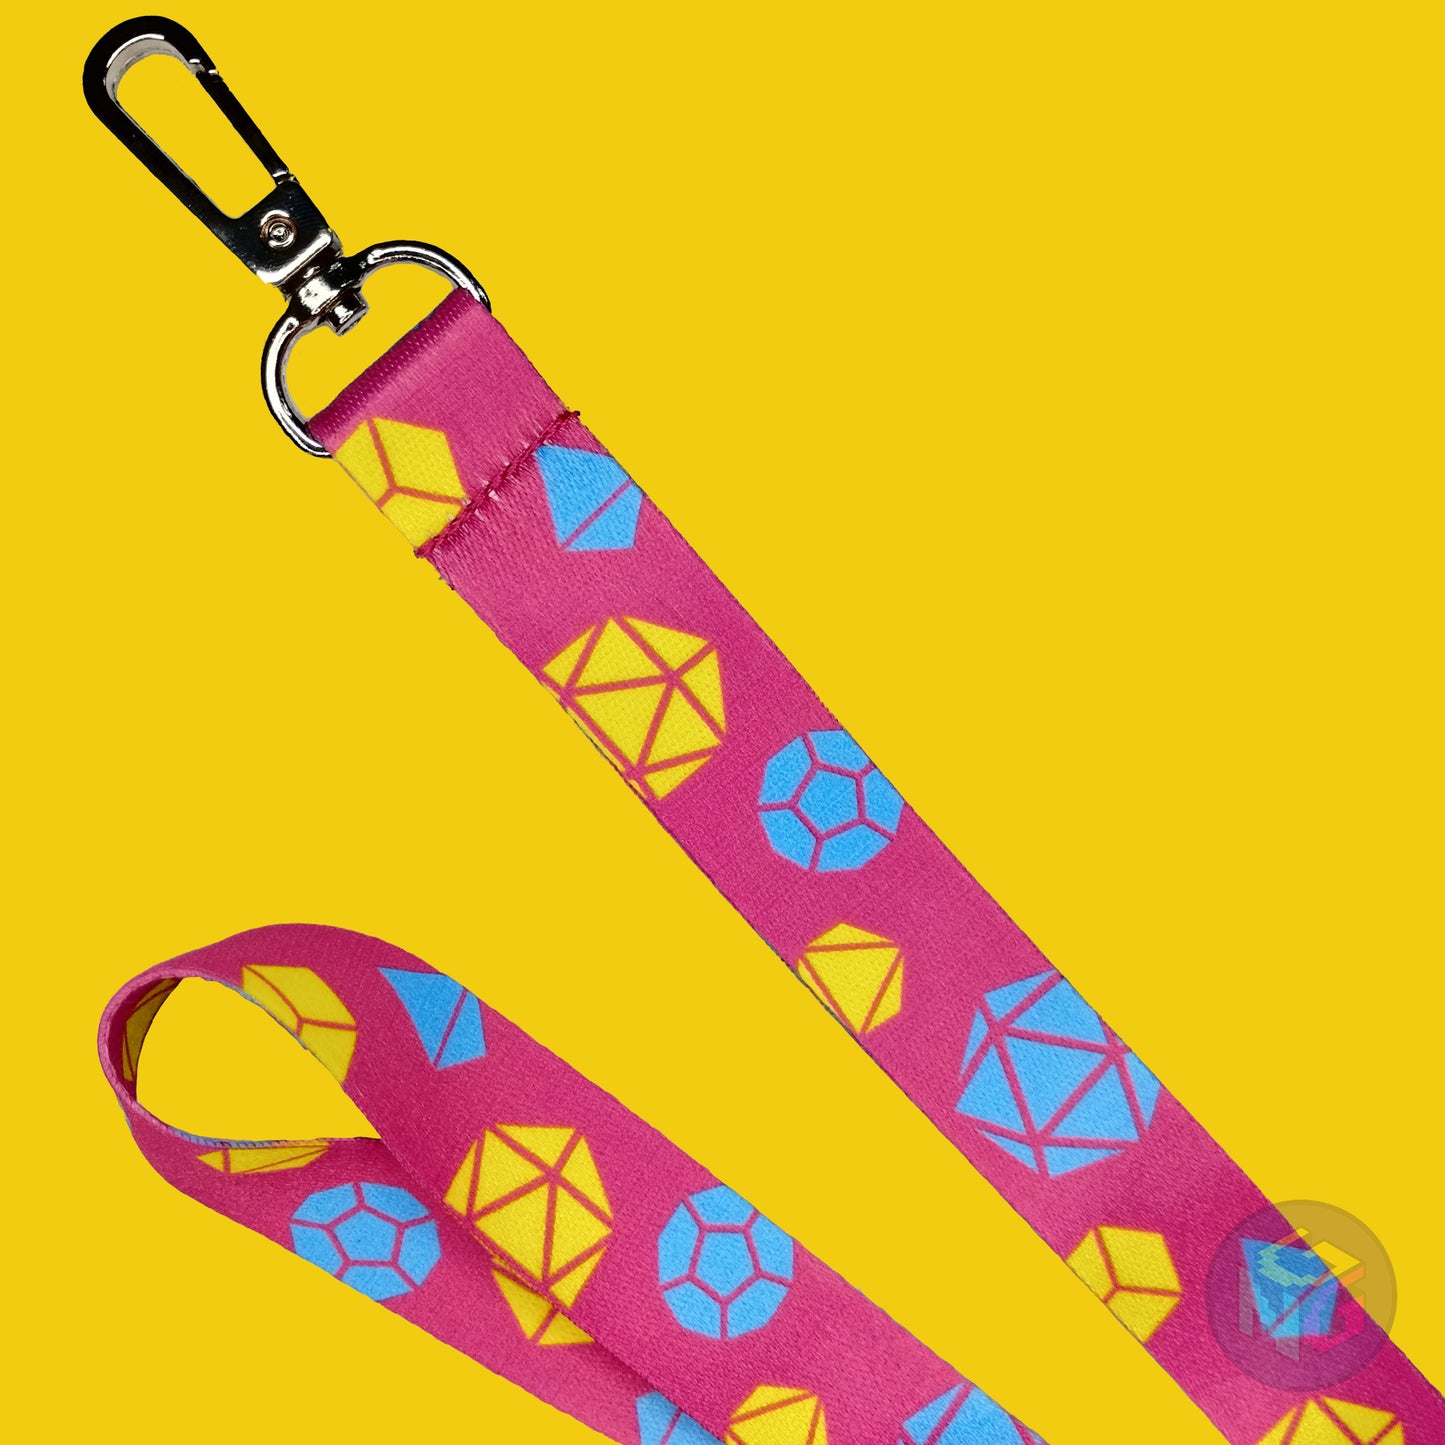 close up detail of the pansexual dungeons and dragons lanyard showing the lobster clasp, yellow d20s, blue d12s, and other dice